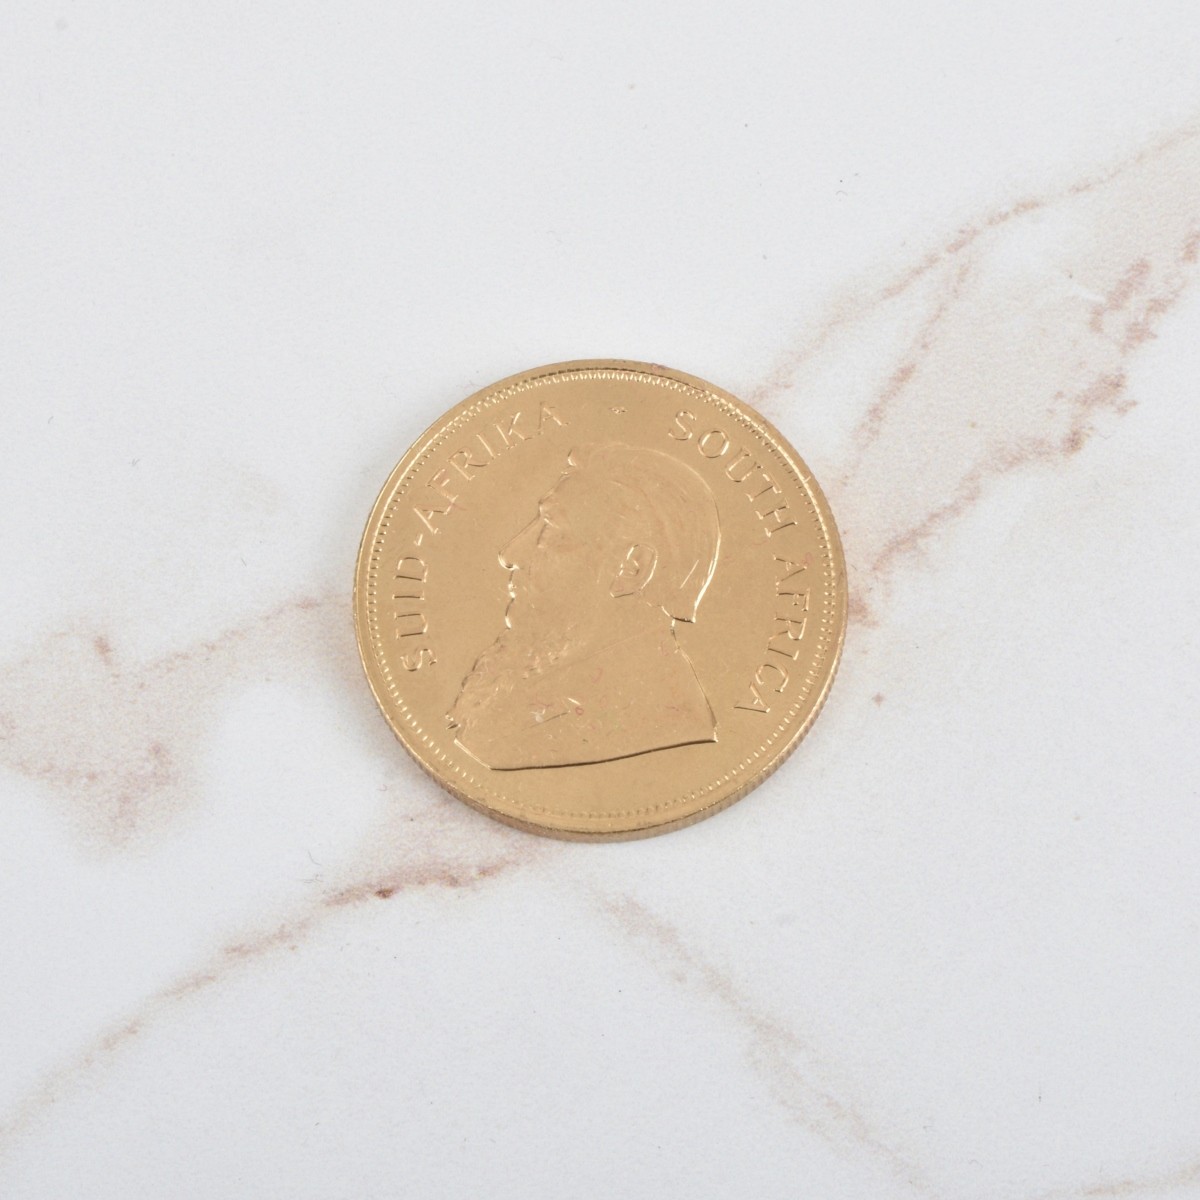 South African Krugerrand Gold Coin